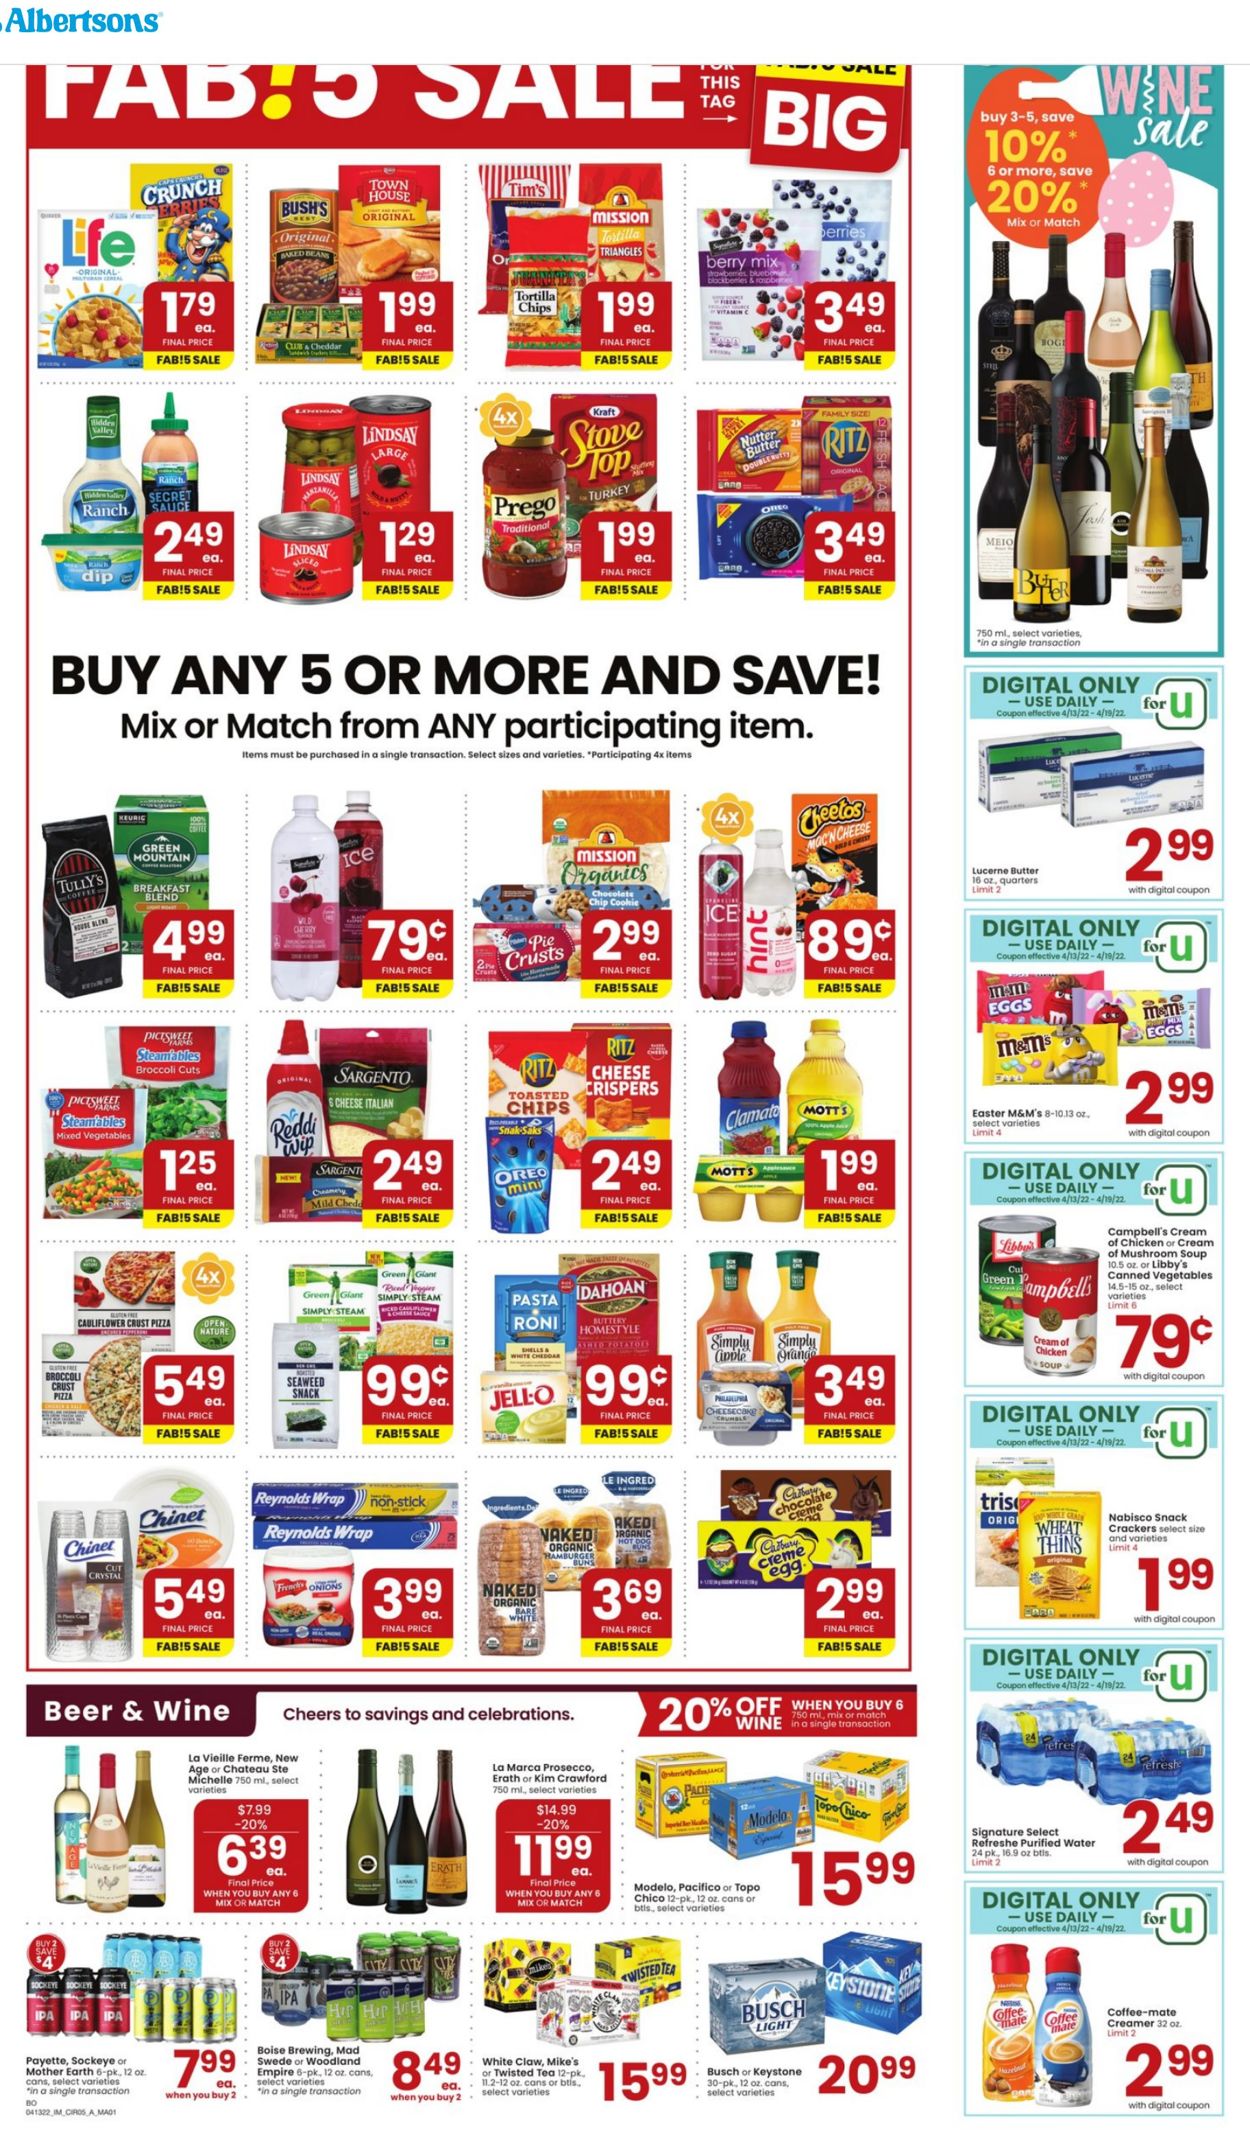 Albertsons EASTER AD 2022 Weekly Ad Circular - valid 04/13-04/19/2022 (Page 5)